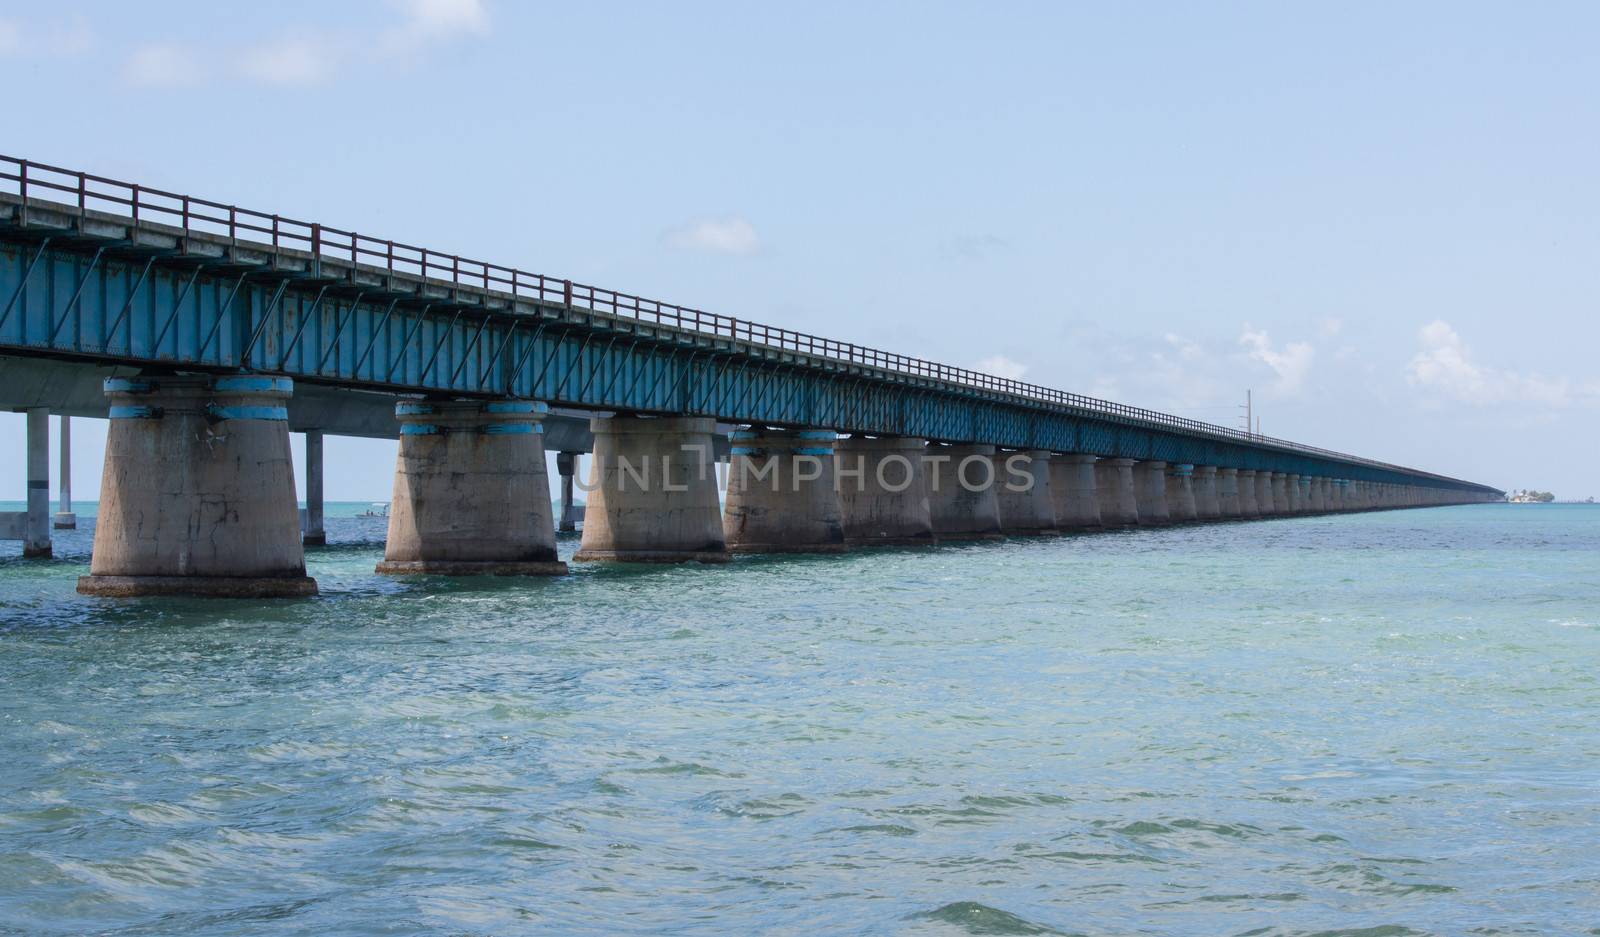 The Seven Mile bridge was built by Henry Flagler as part of the Overseas Railroad to Key West. After a hurricane shut down the railroad, Florida purchased this bridge and used it as part of the overseas highway to Key West. Today this 2.2 mile section is used for pedestrians, fishermen, and bicyclists and connects to Pigeon Key. The new seven mile bridge can be seen running alongside the old bridge.